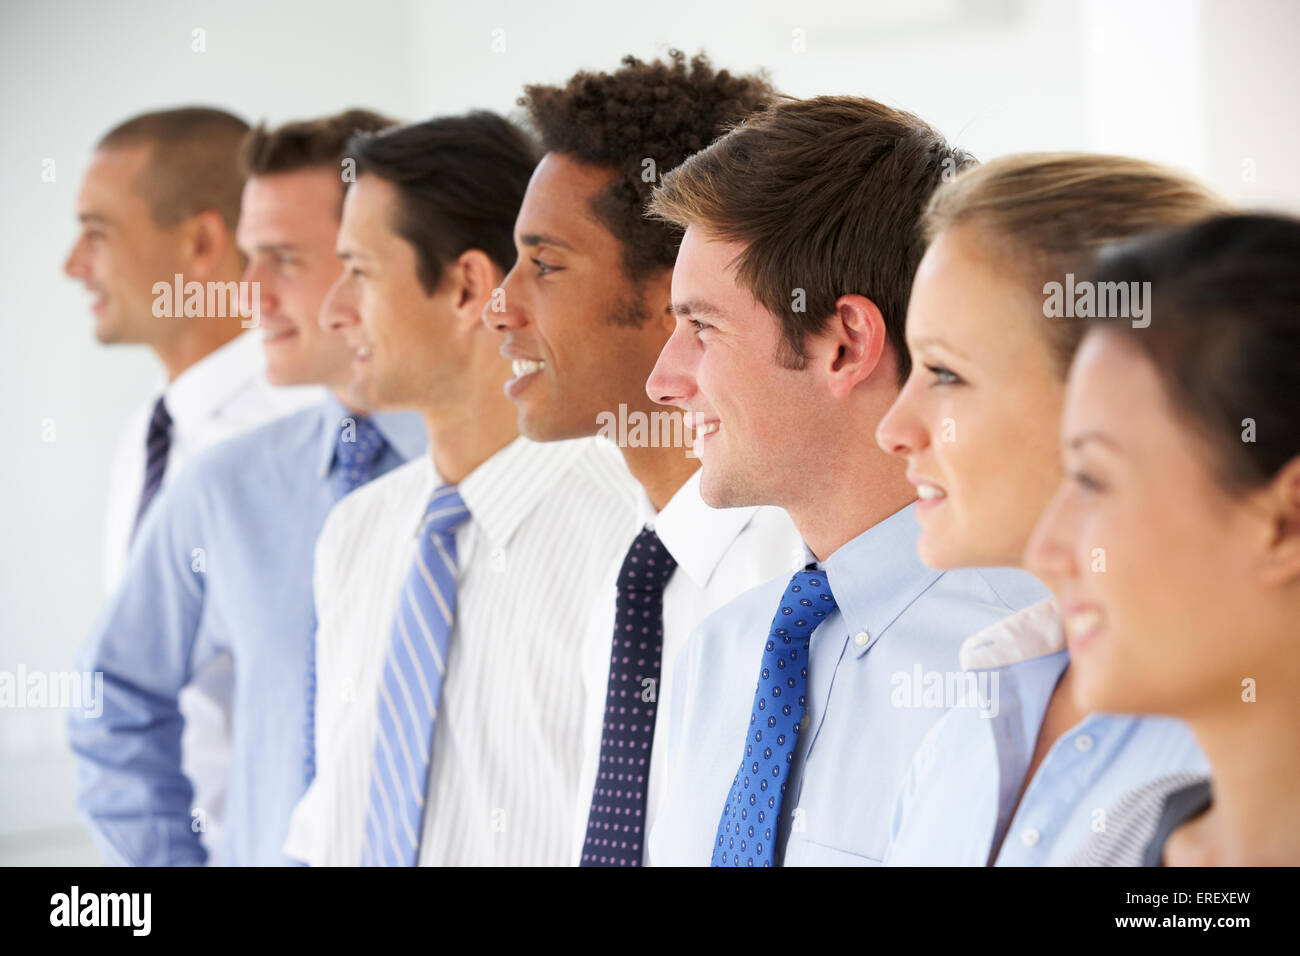 Line Of Happy And Positive Business People Stock Photo